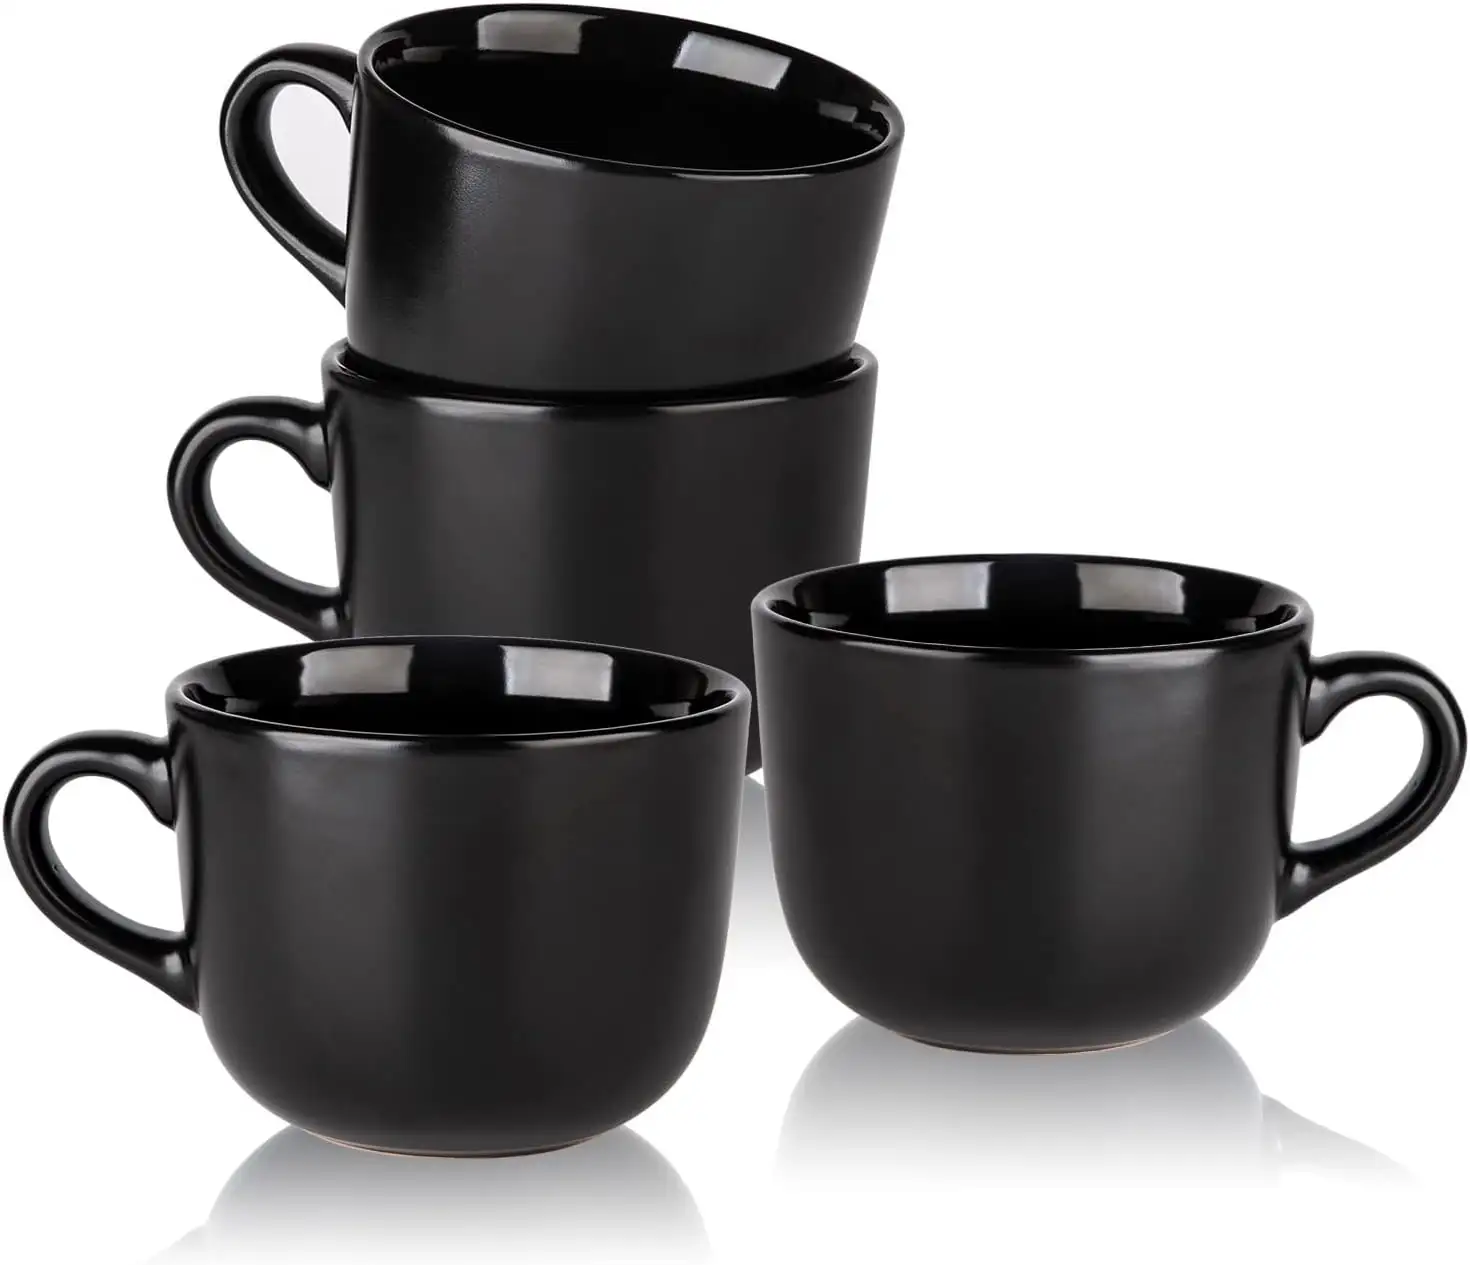 24 oz Soup Mugs with Handles, Ceramic Bowls Mugs Set with handles for Coffee Cereal Cappuccino Snacks,